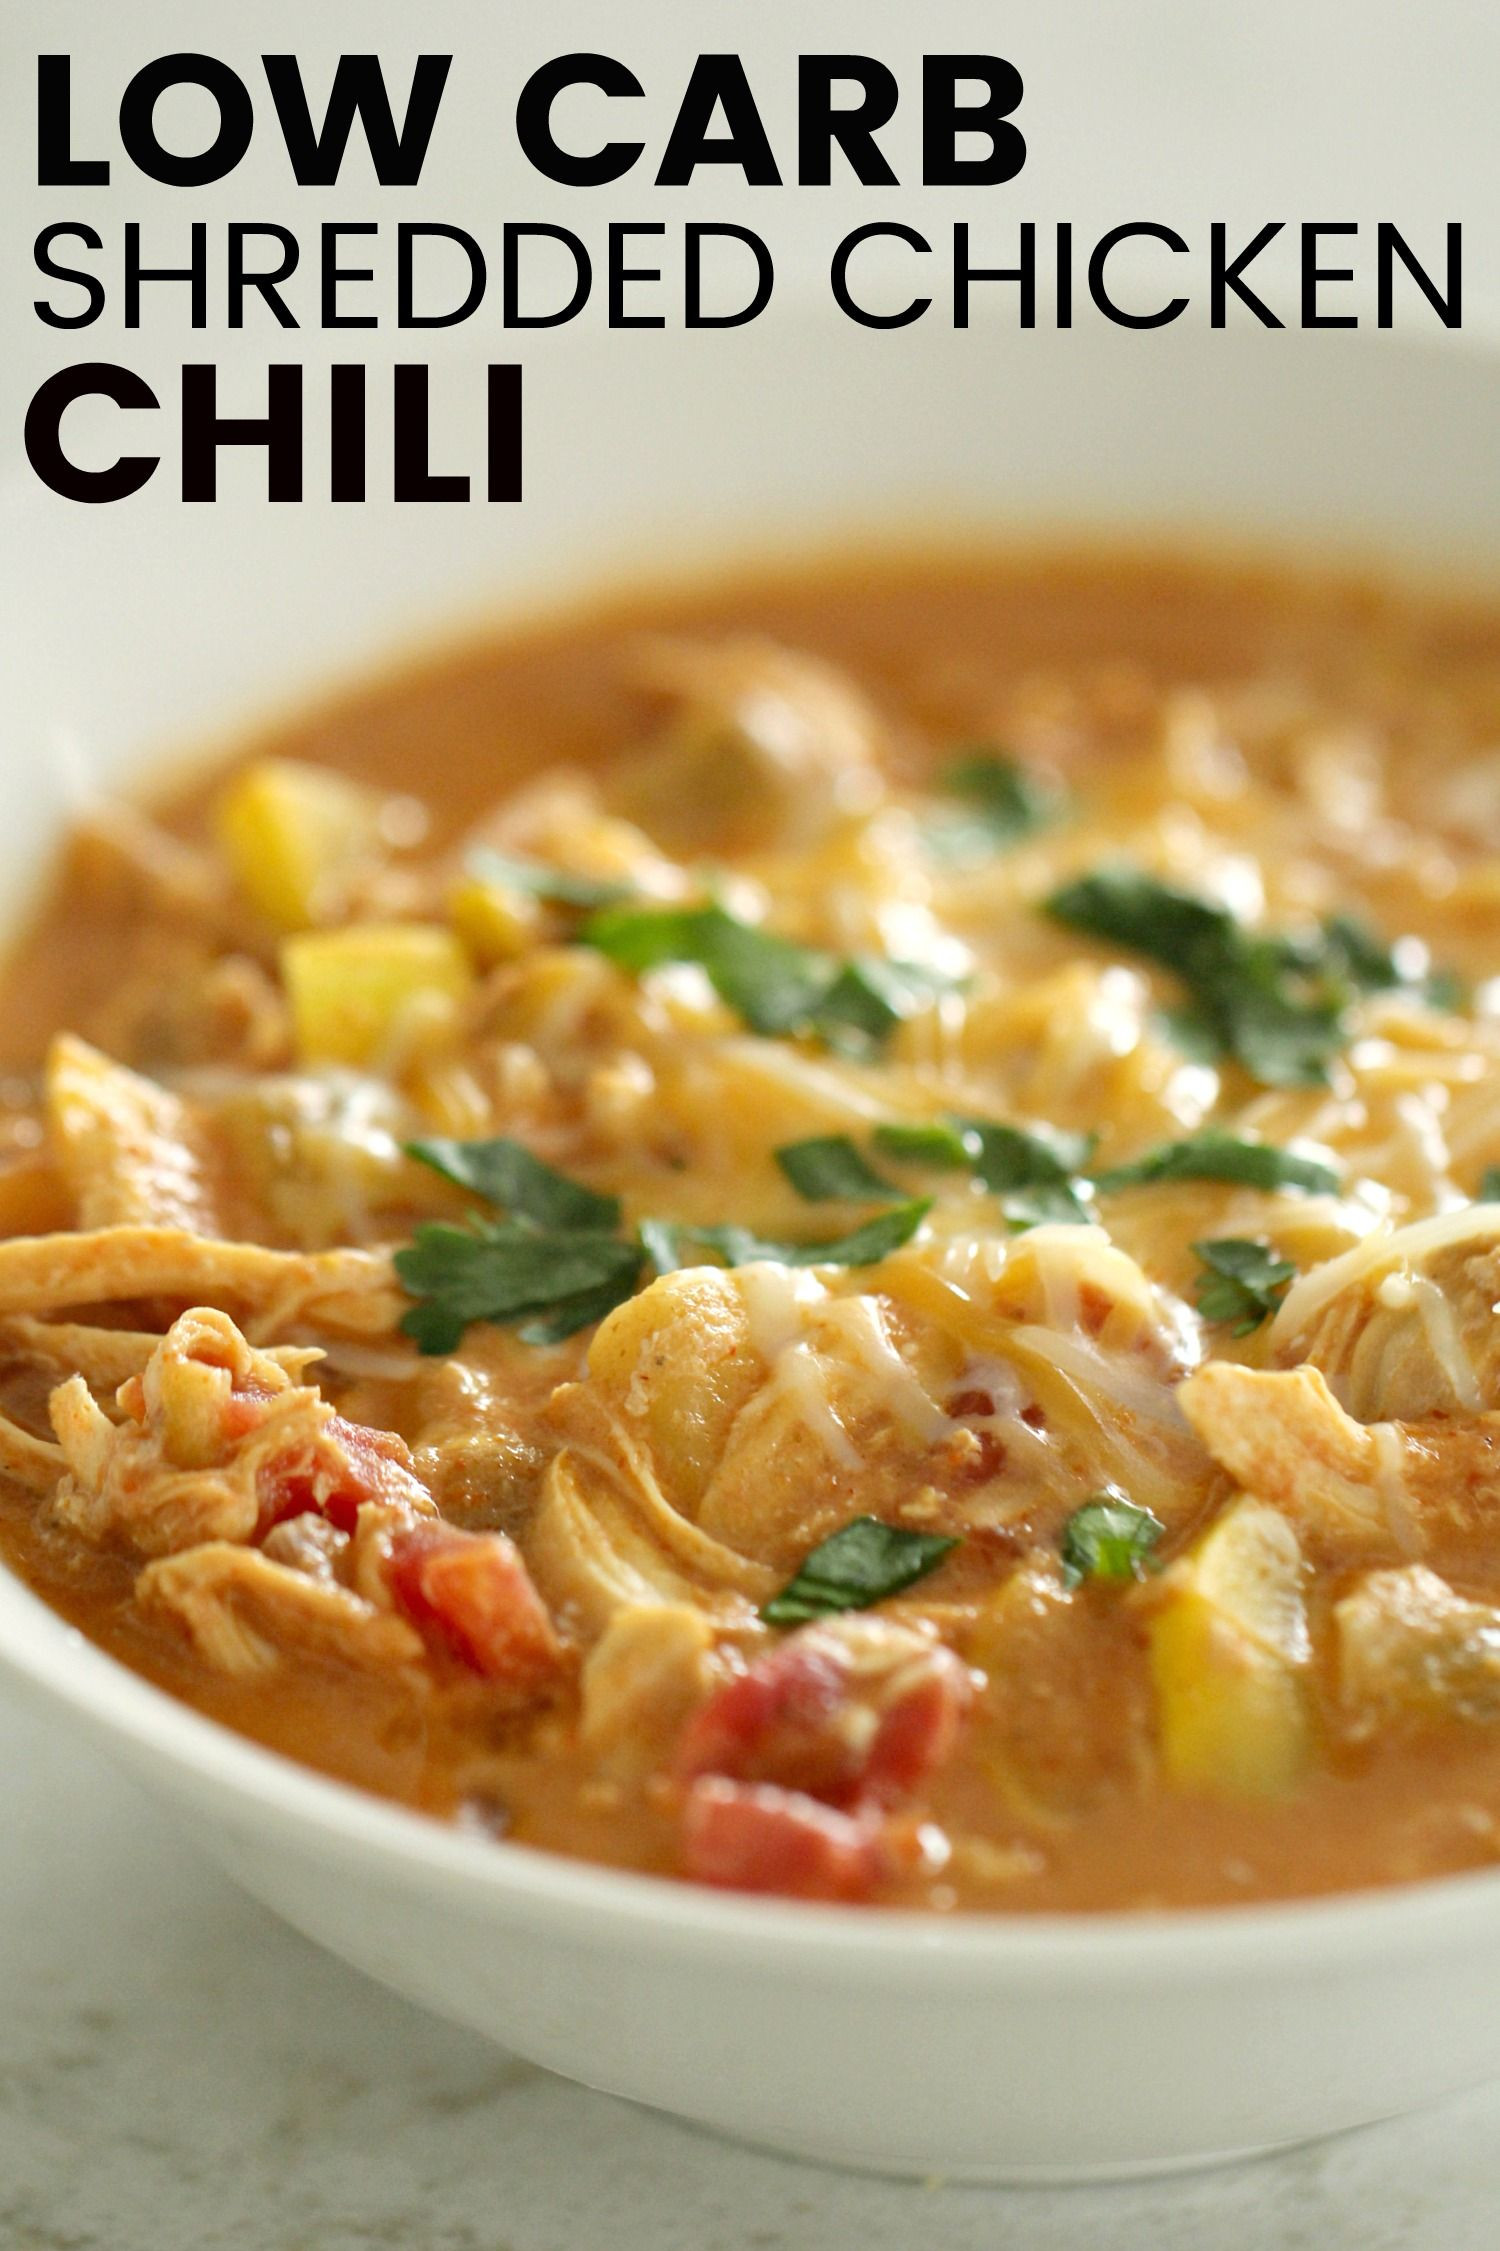 Low Carb Leftover Rotisserie Chicken Recipes New Low Carb Shredded Rotisserie Chicken Chili